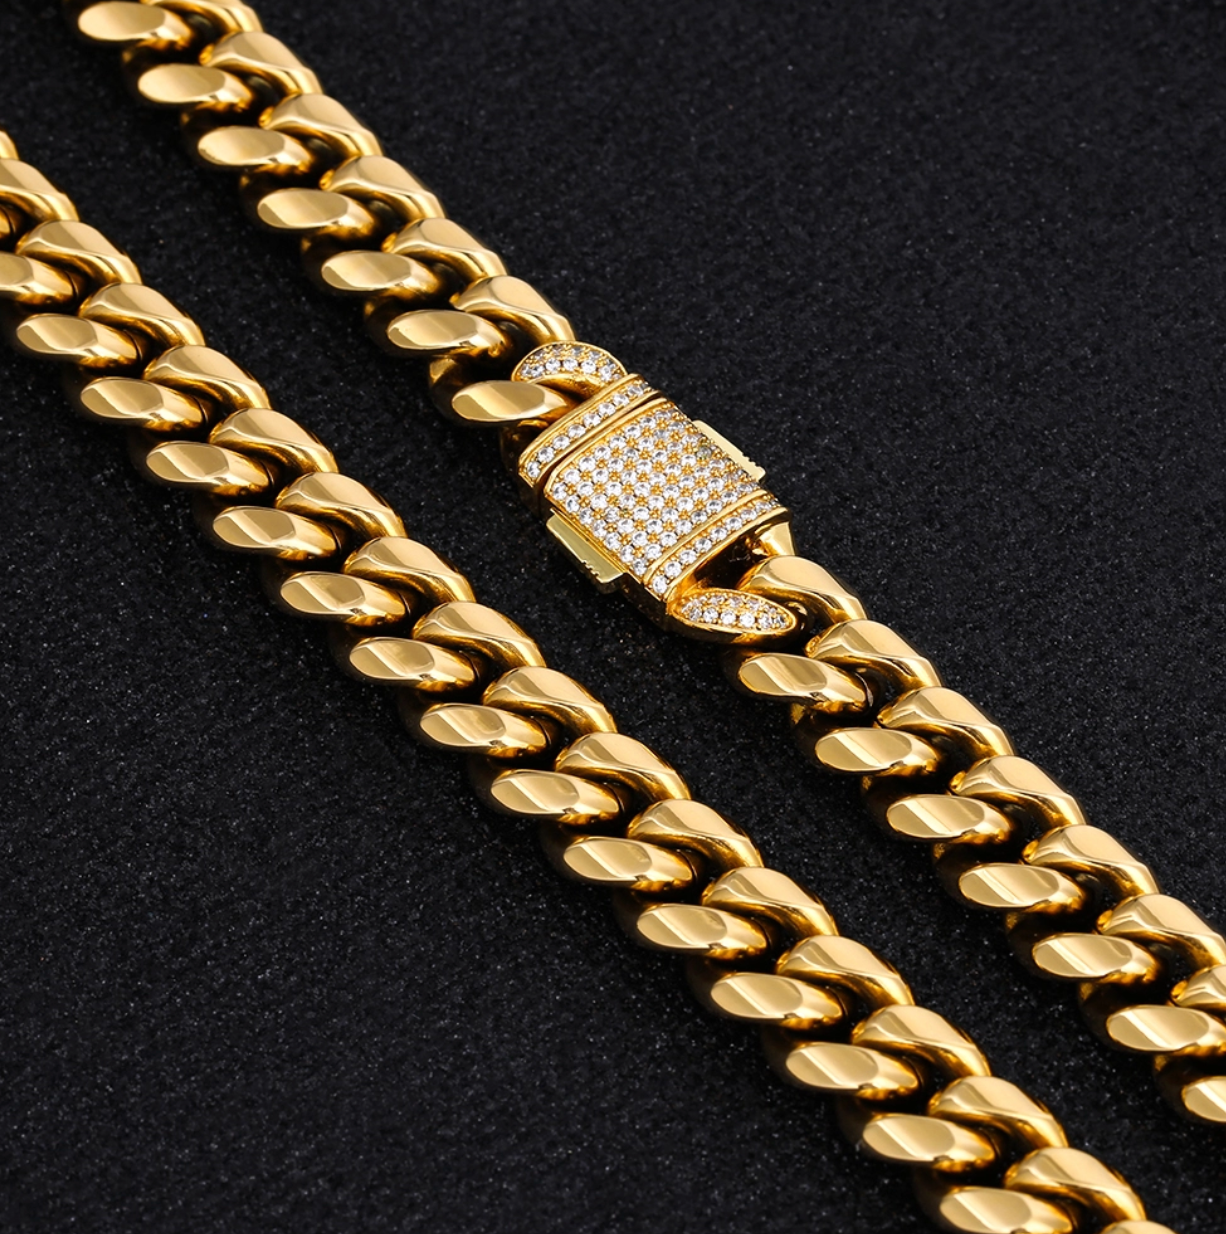 12mm Multicolored Cuban Link Chain 22 inch